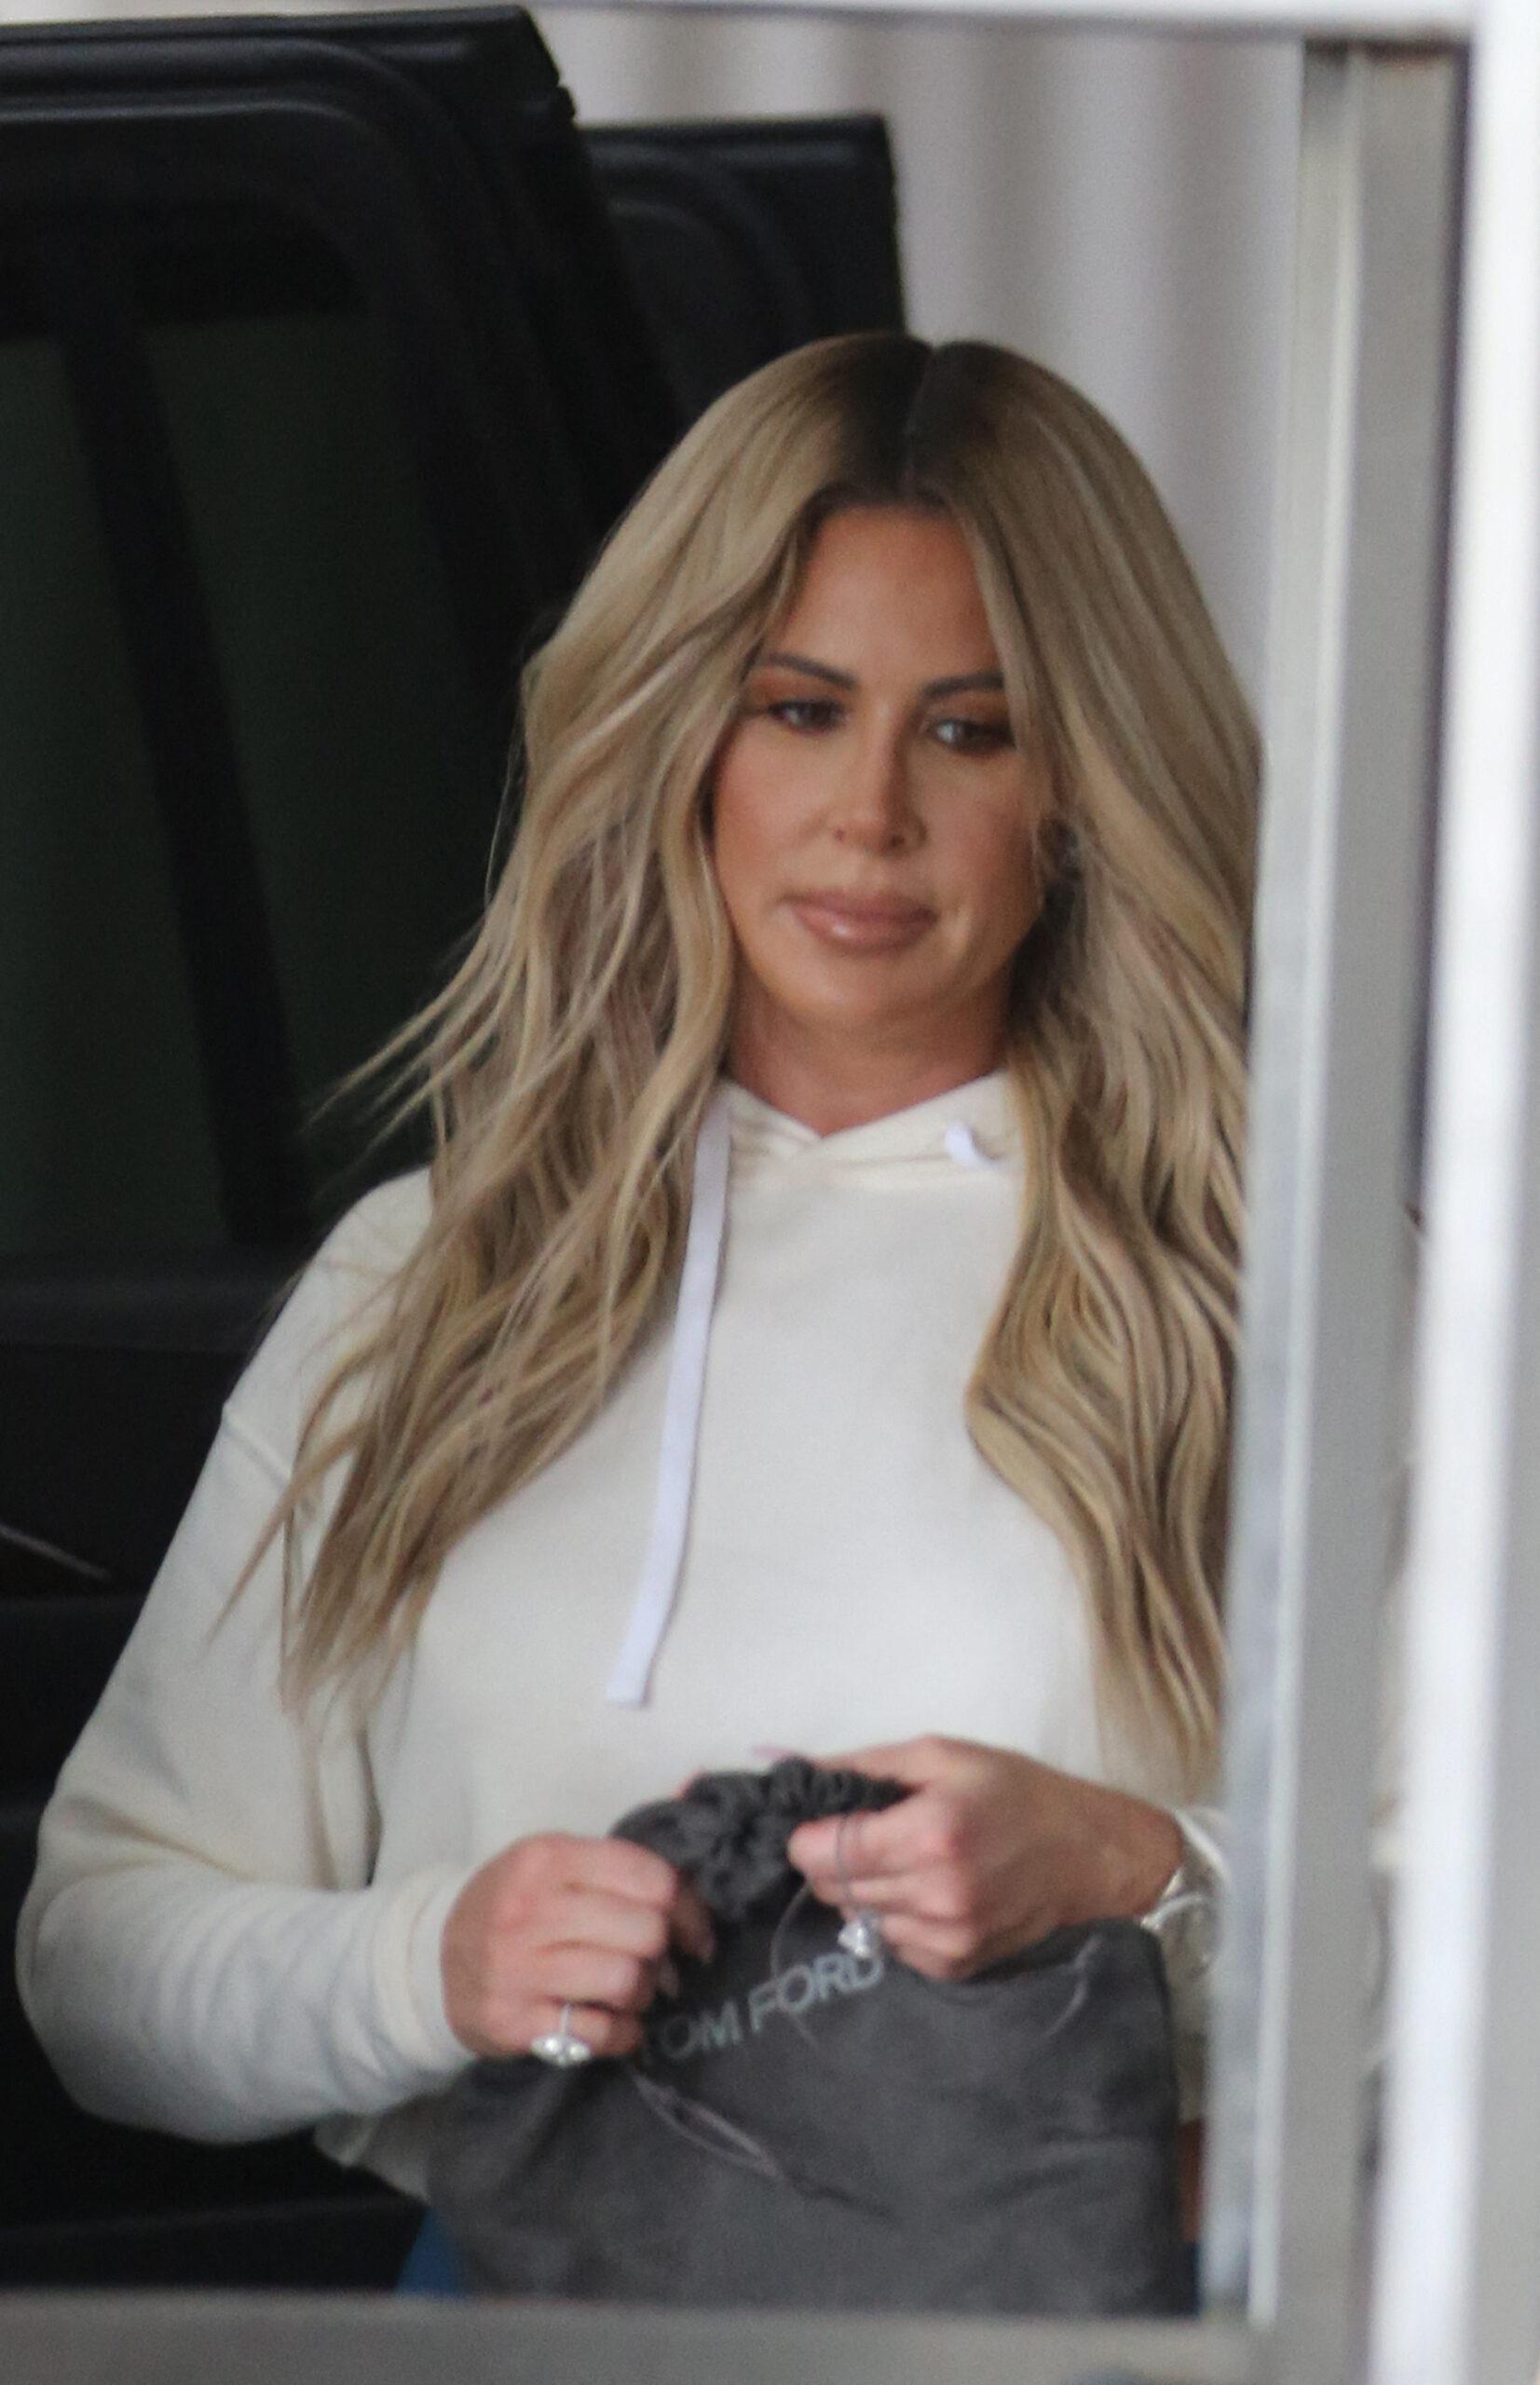 Real Housewives of Atlanta Star Kim Zolciak shows off her curves as she leaves her Miami Beach hotel